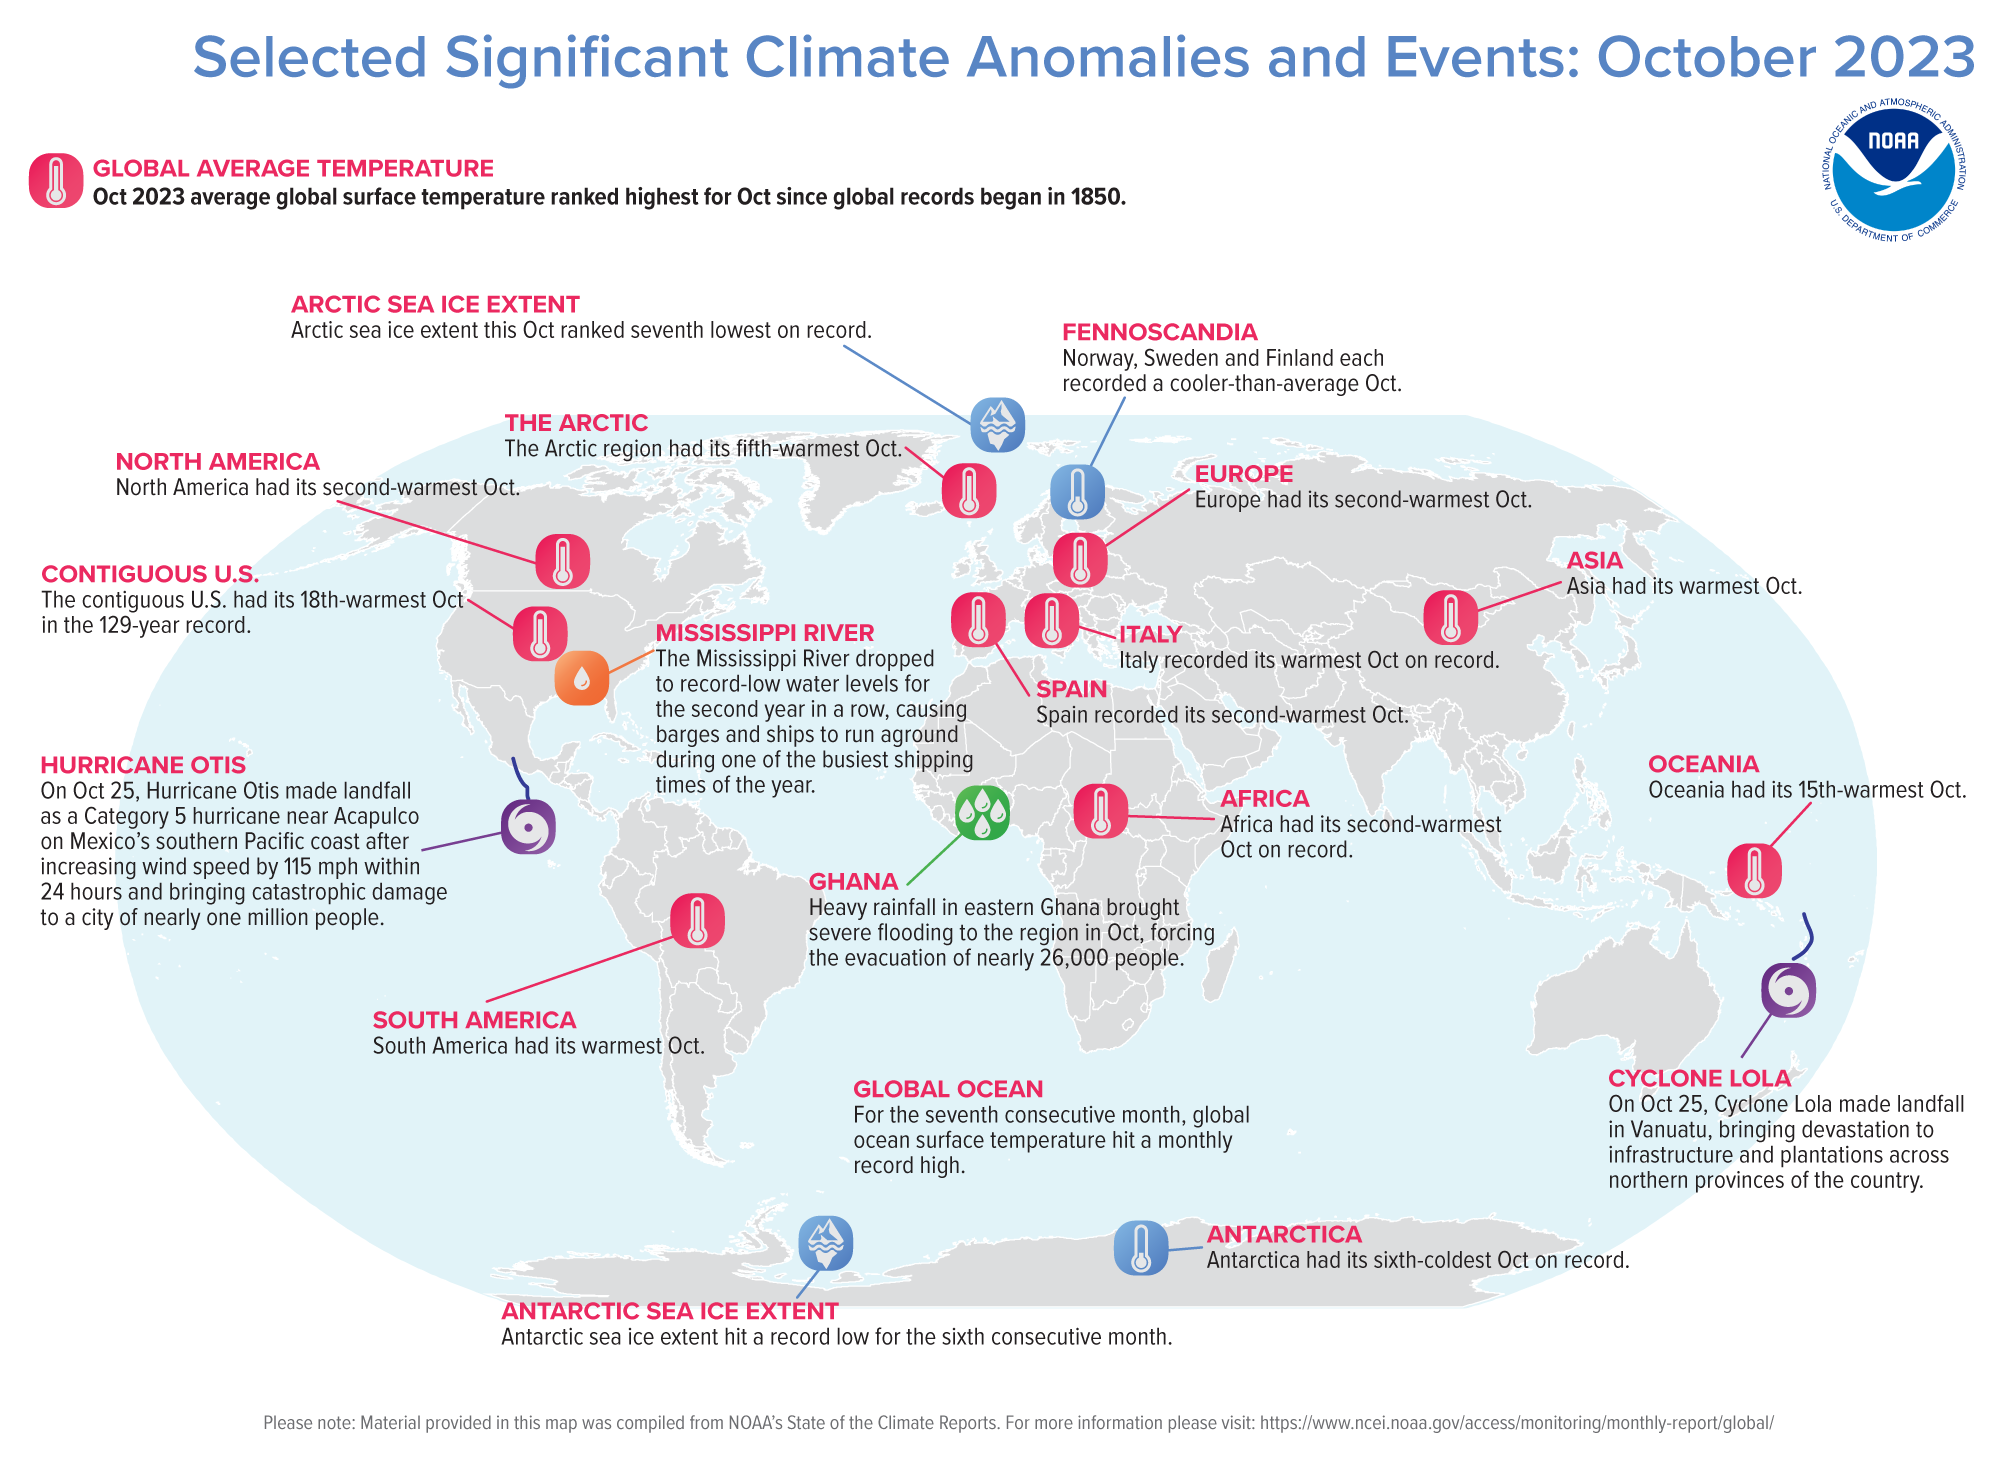 Jan. 14, 2022: Earth sets record for hottest in history 6th year in a row